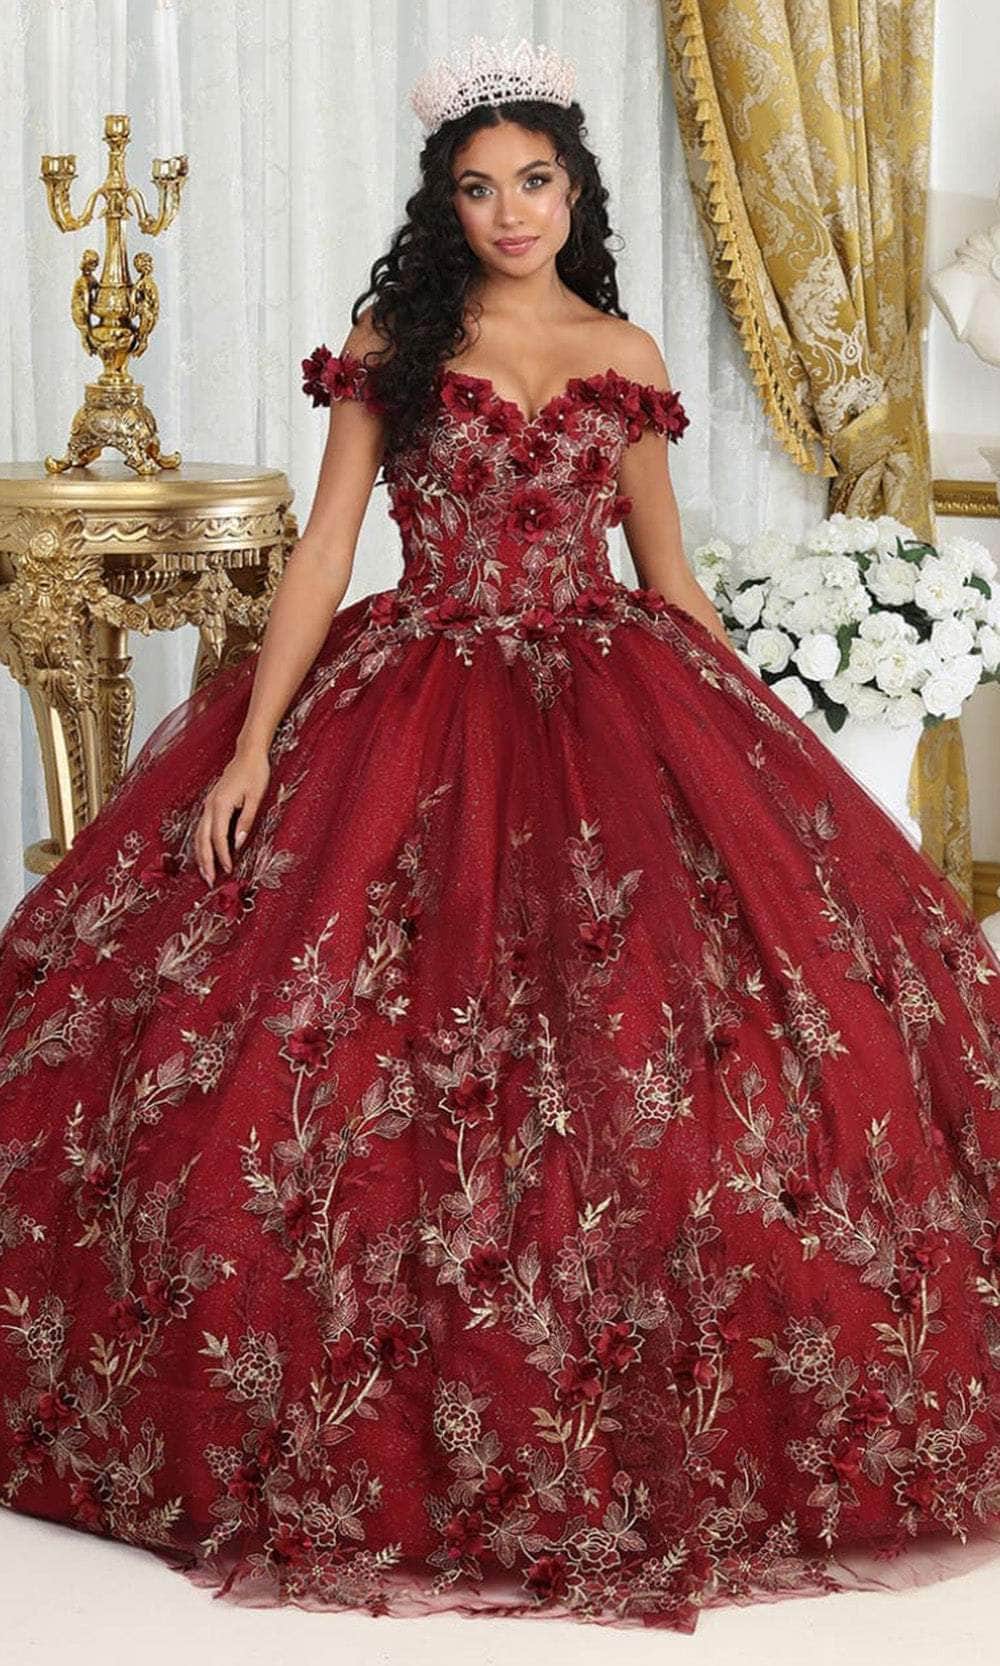 Image of May Queen LK215 - Floral Embroidered Ballgown